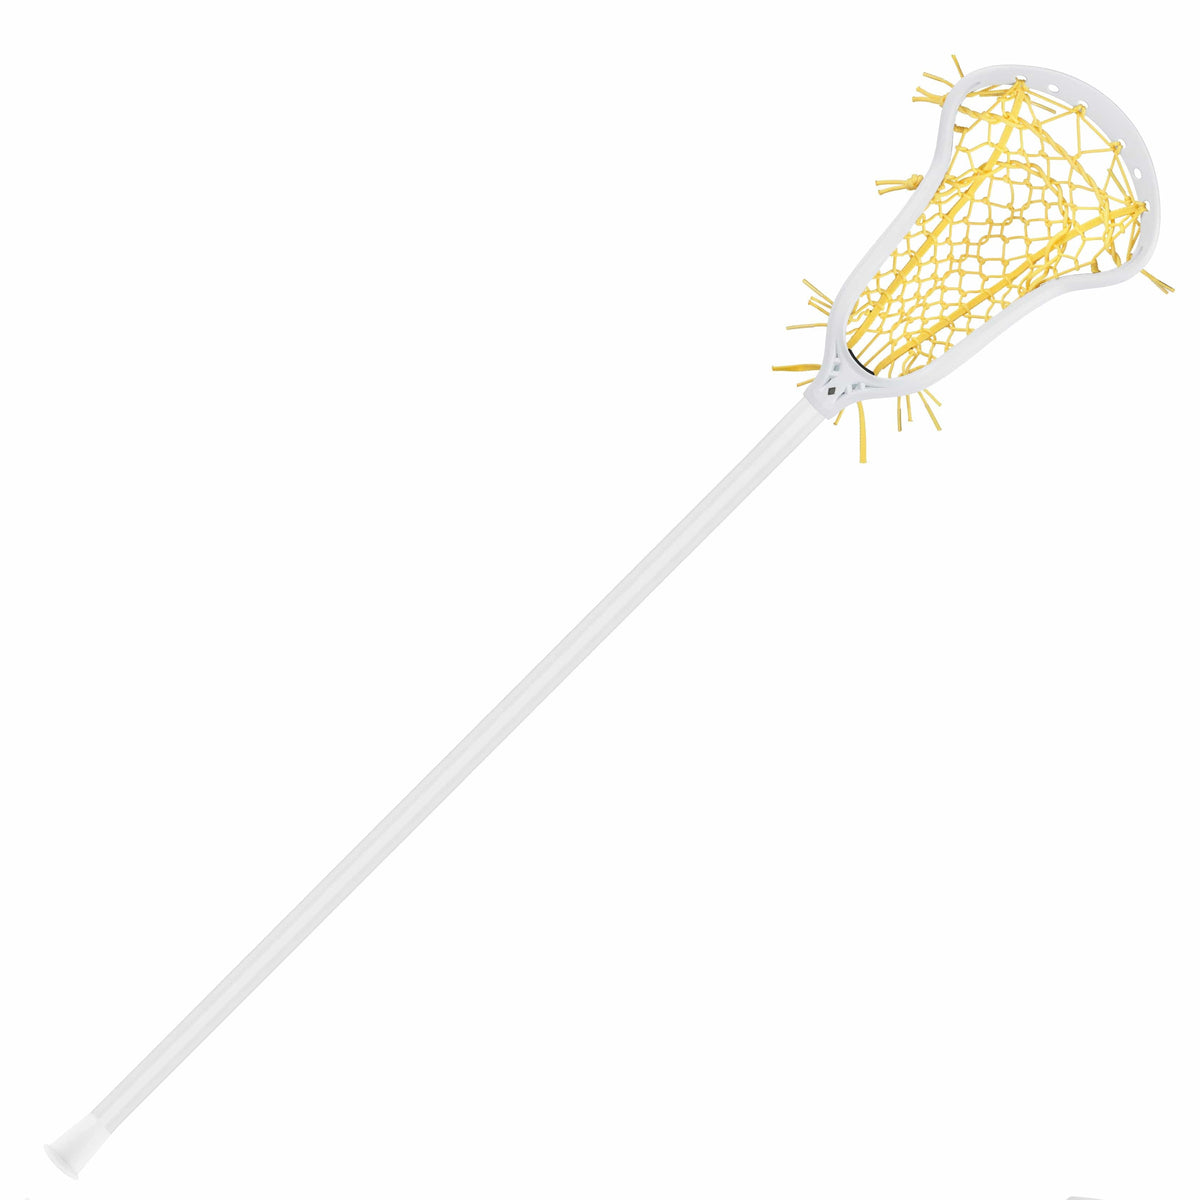 StringKing Womens Complete Sticks White/Yellow StringKing Womens Complete 2 Pro Defense Lacrosse Stick With Tech Trad and Metal 3 Pro Shaft from Lacrosse Fanatic